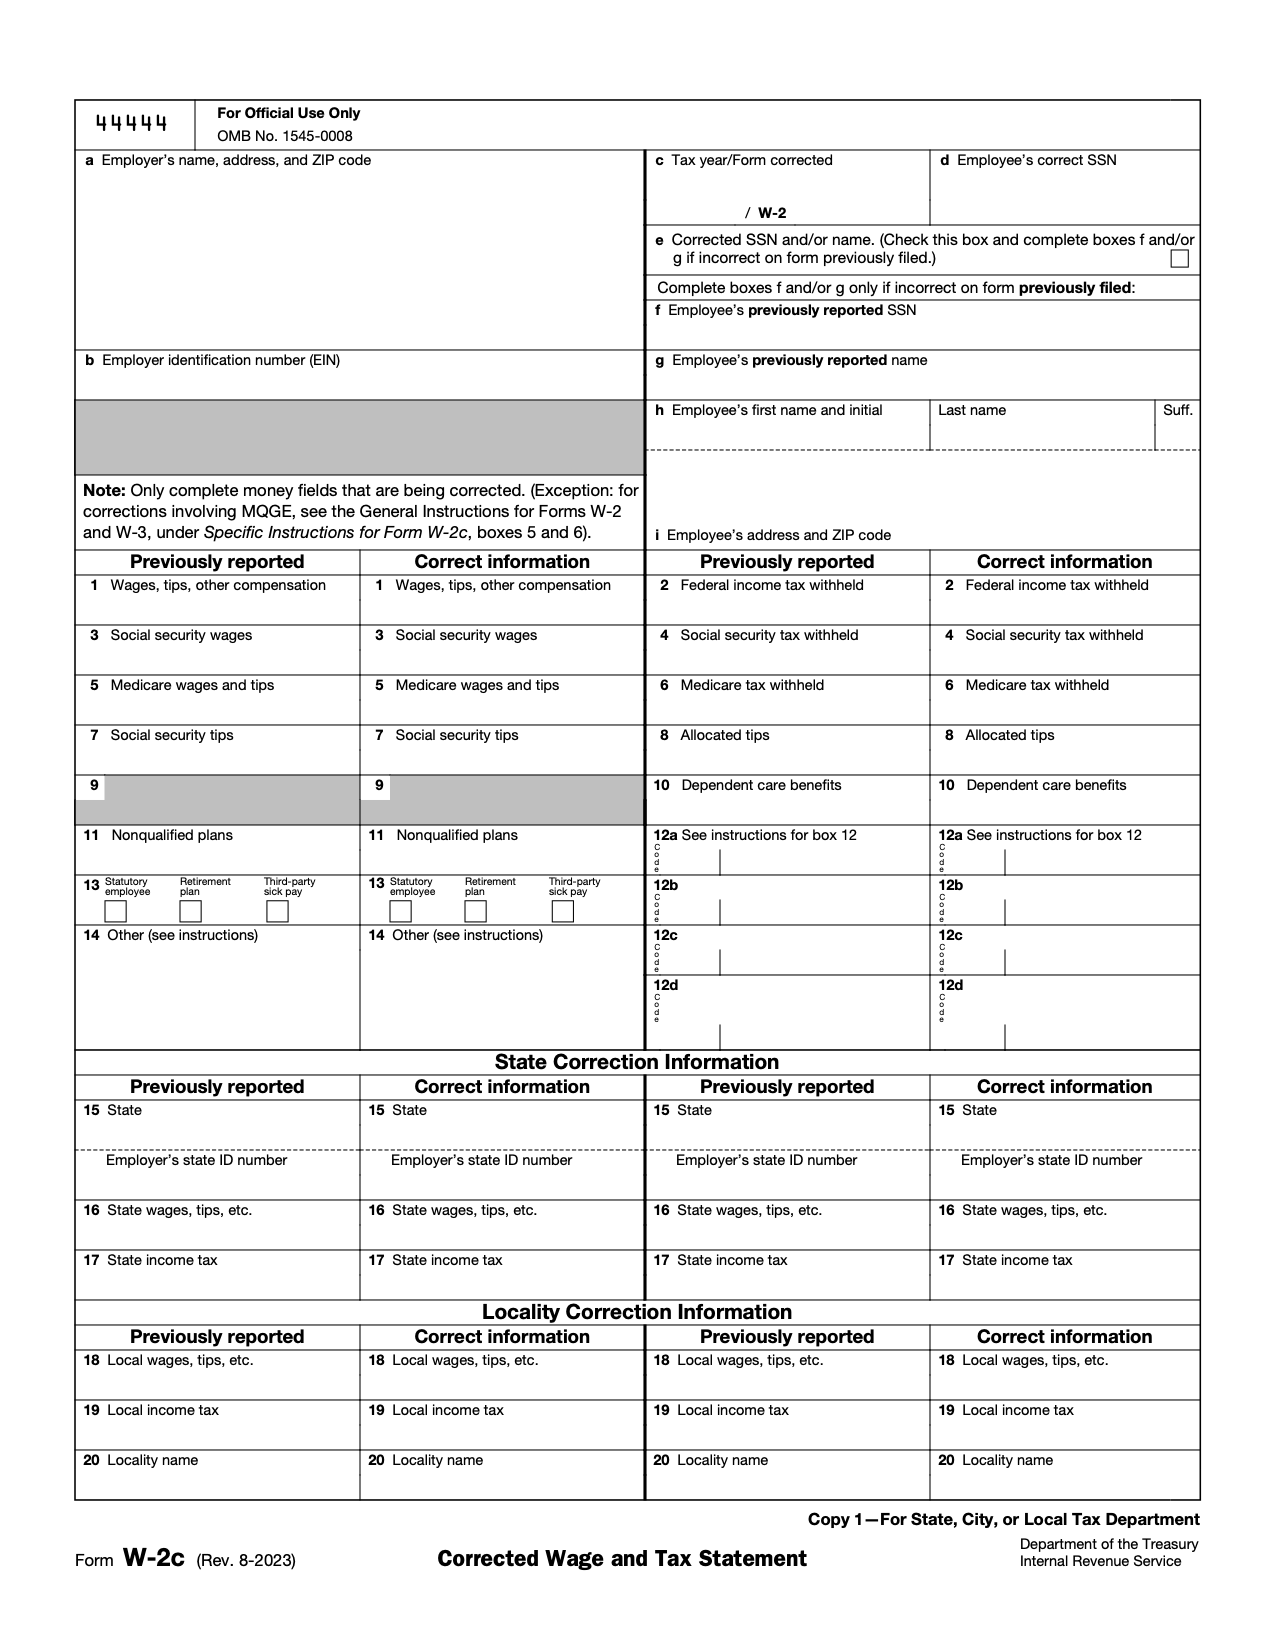 IRS Form W-2c | Corrected Wage and Tax Statement